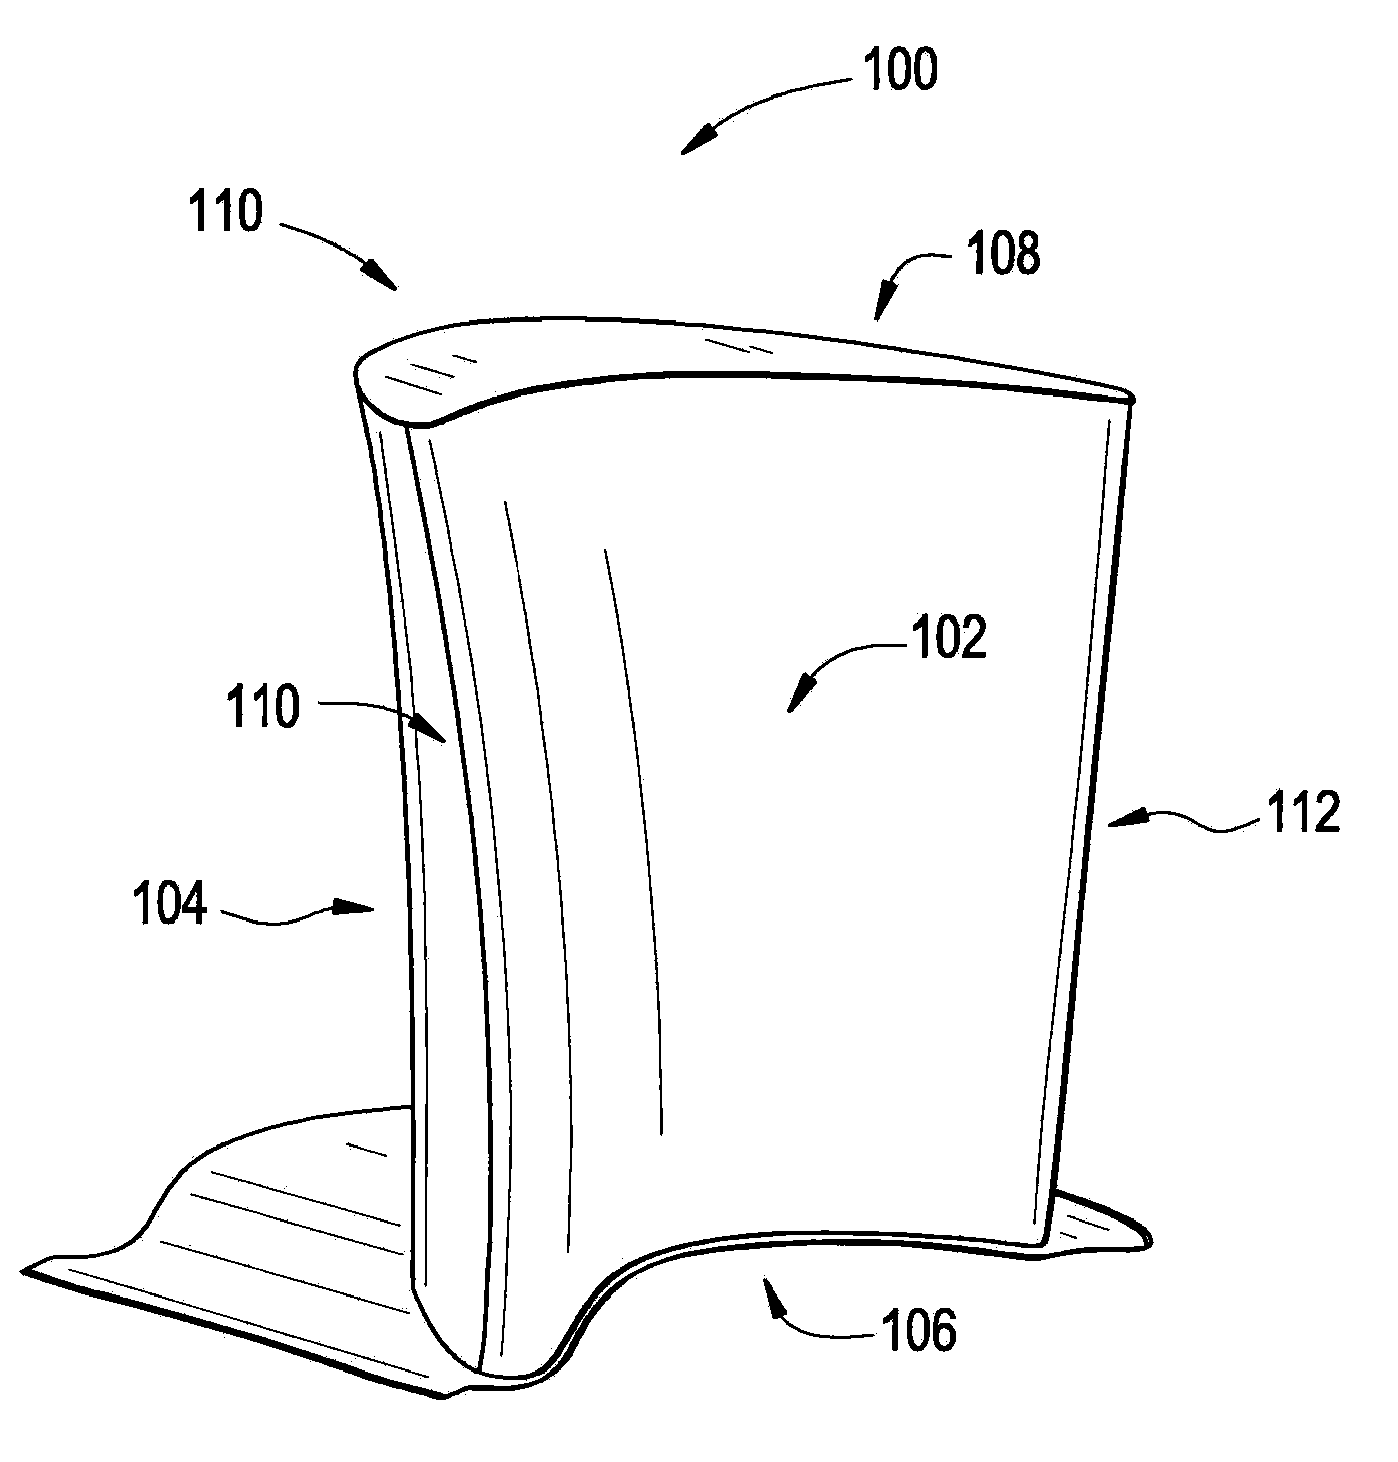 System and Method for Reducing Bucket Tip Losses